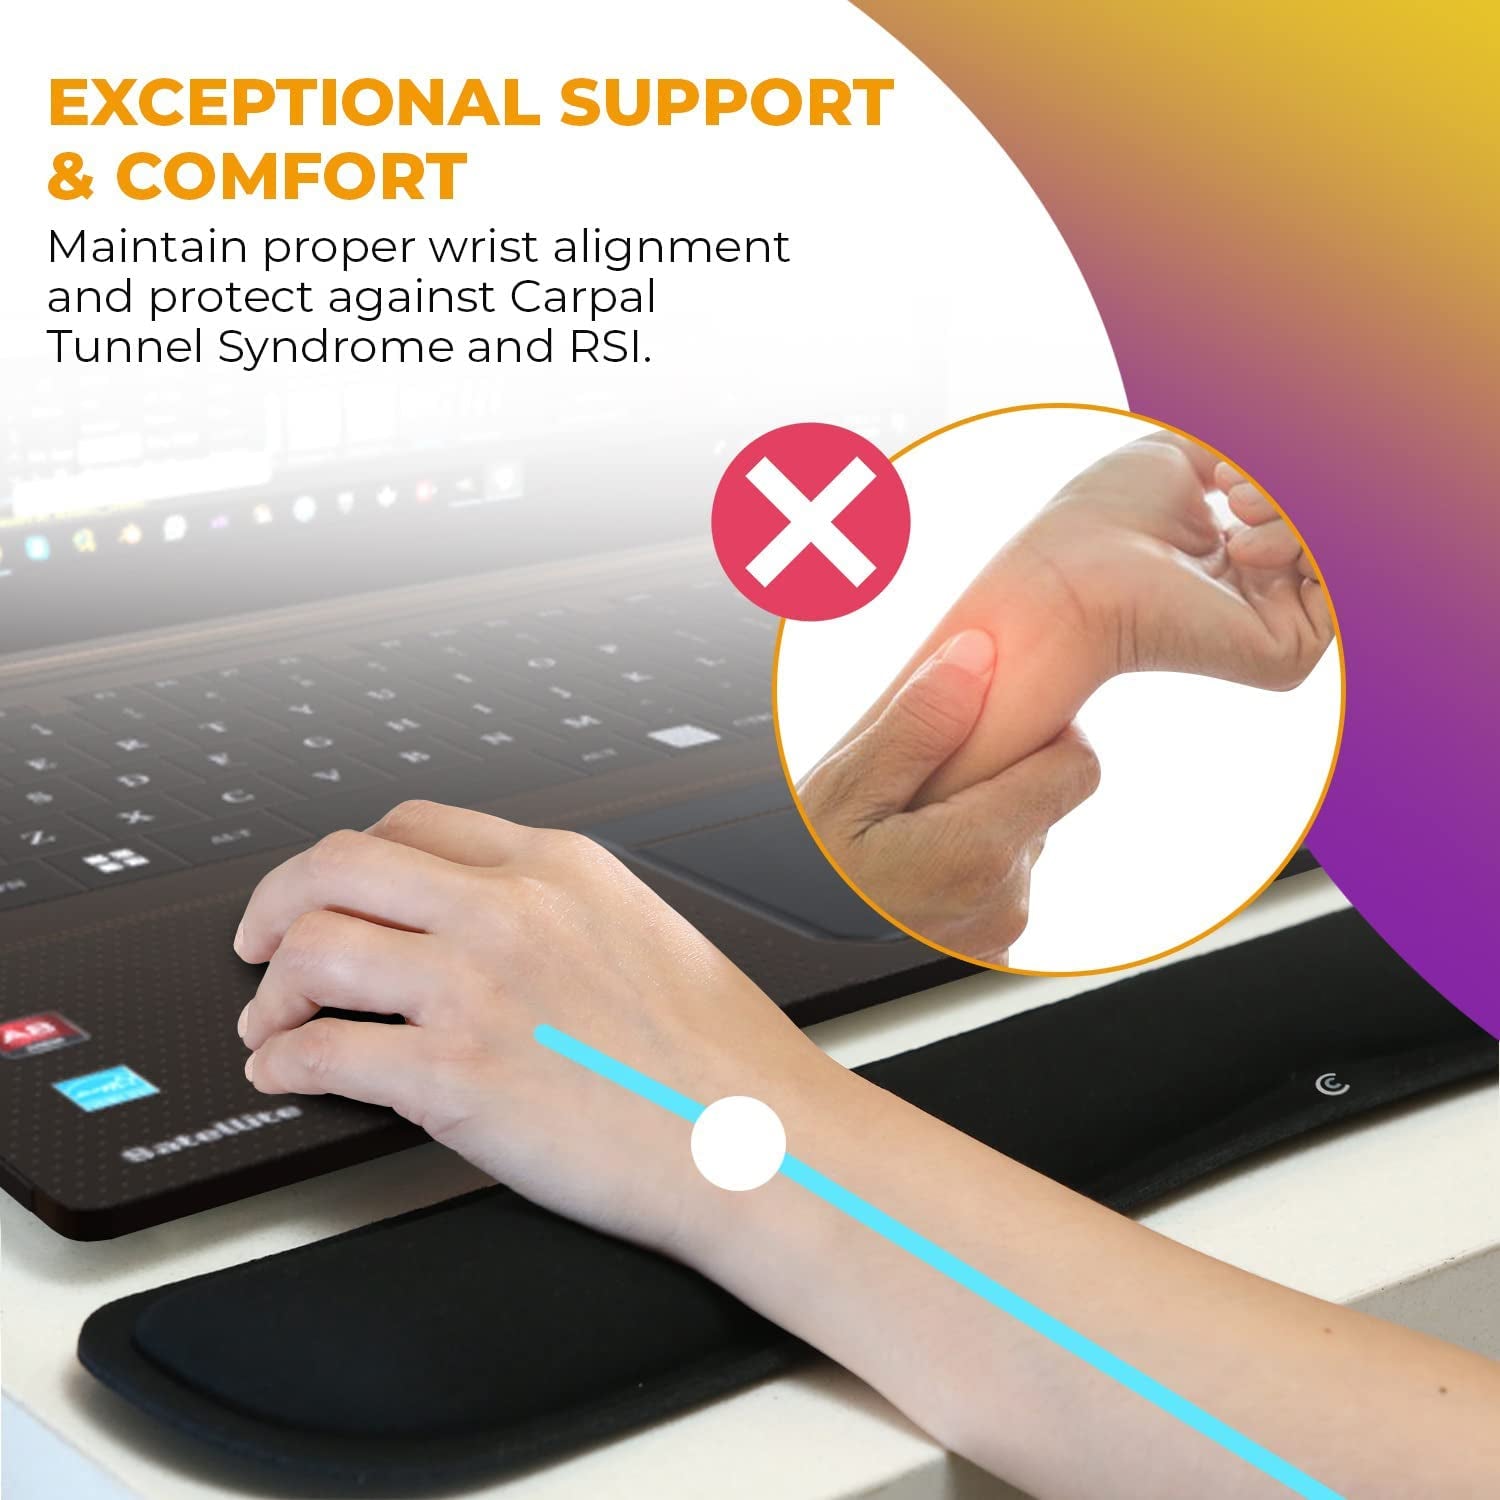 Ergonomic Wrist Rests Set with Memory Foam Cushion for Keyboard and Mouse Pad,  Support for Wrists, Hands & Arms for Laptop, Computer Desk & Gaming